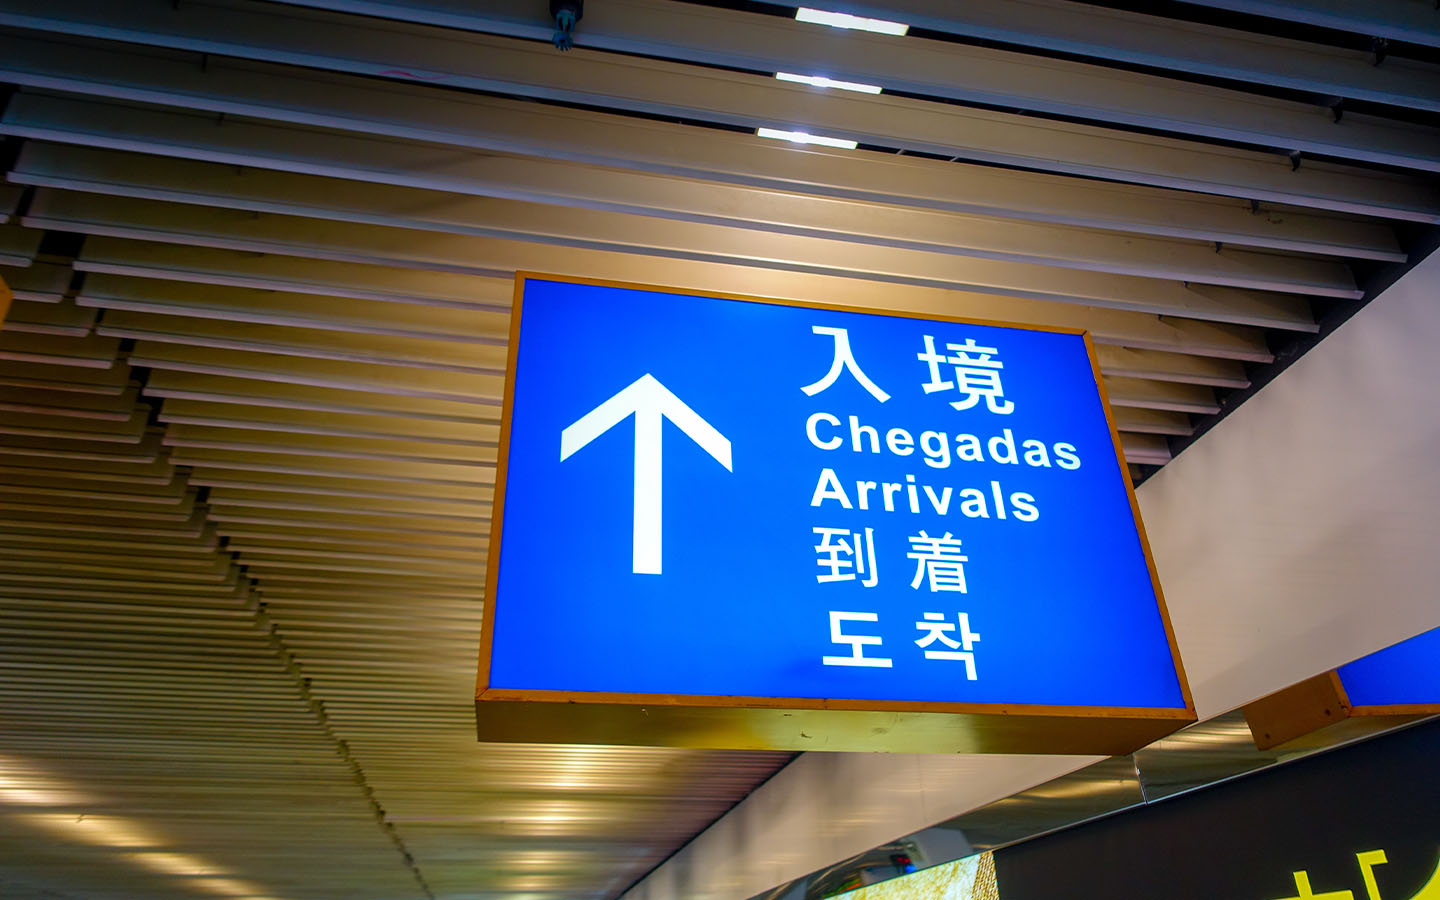 Portuguese passport holders can now get automated clearance at Macao’s borders